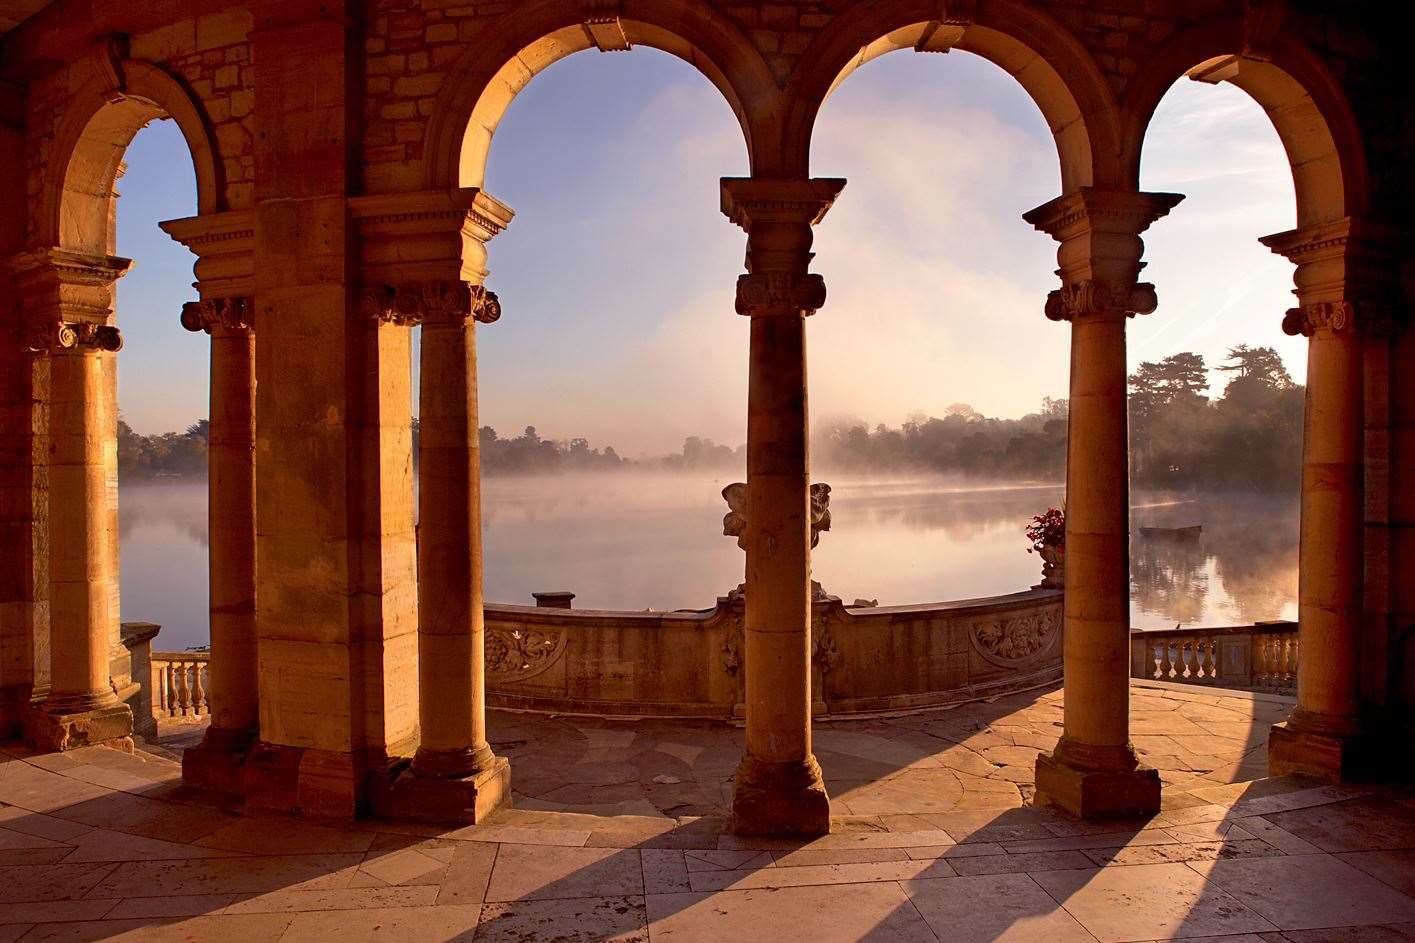 The Loggia is one of the venues for live theatre at Hever Castle